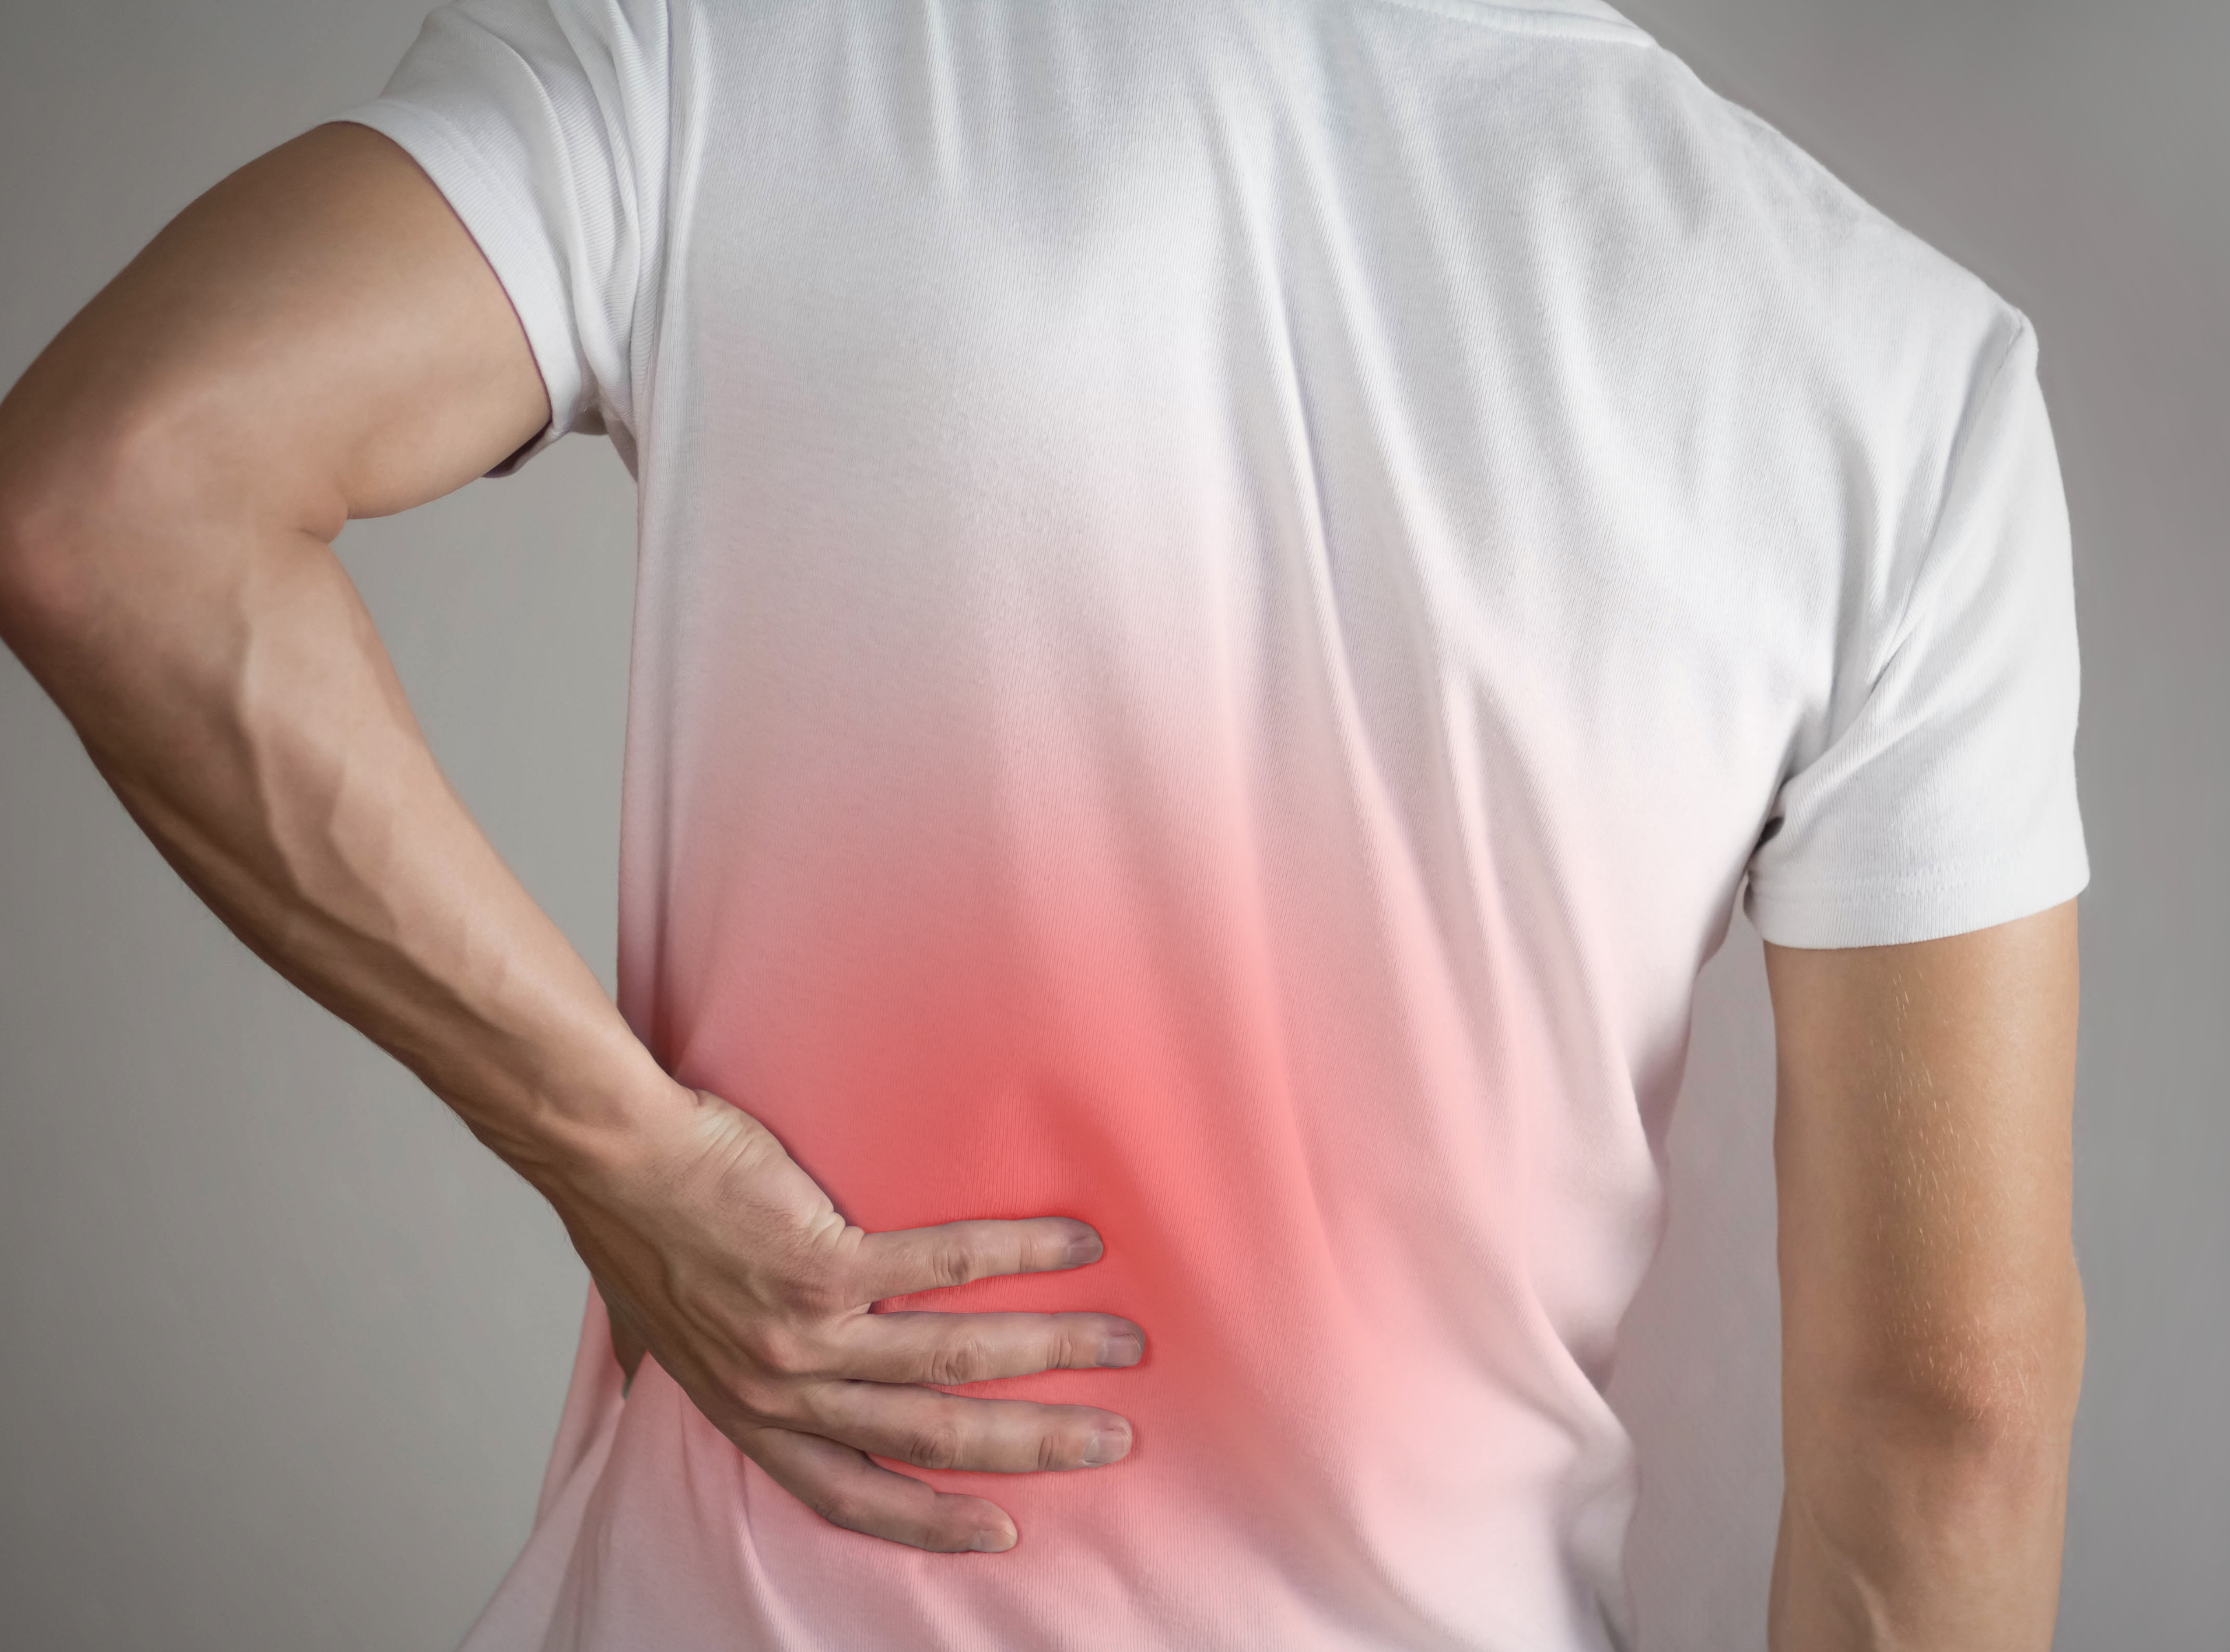 4 Ways to Alleviate the Pain of Sciatica and Protect Your Back and